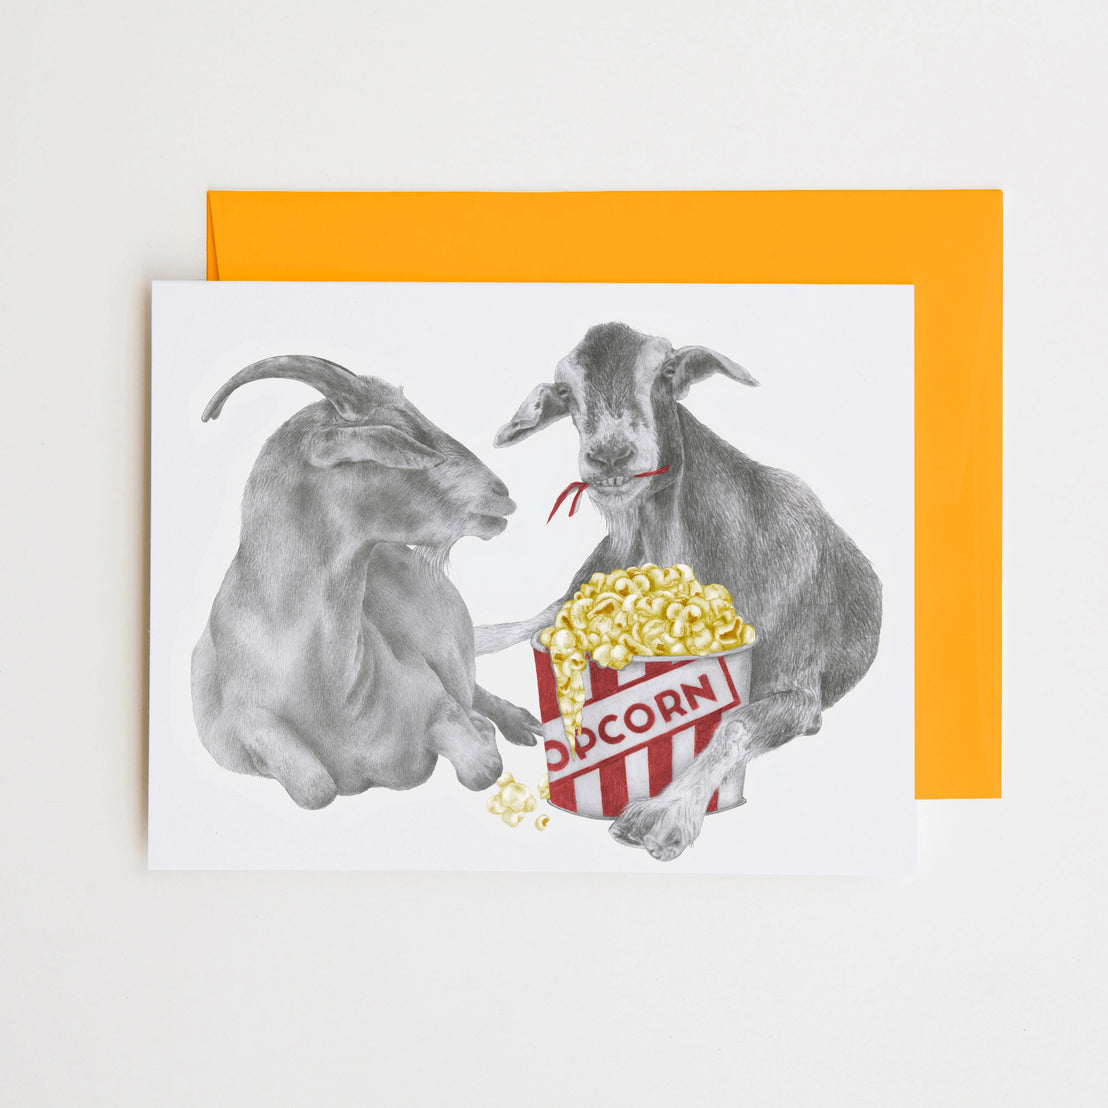 Goats & Popcorn, Central & Gus